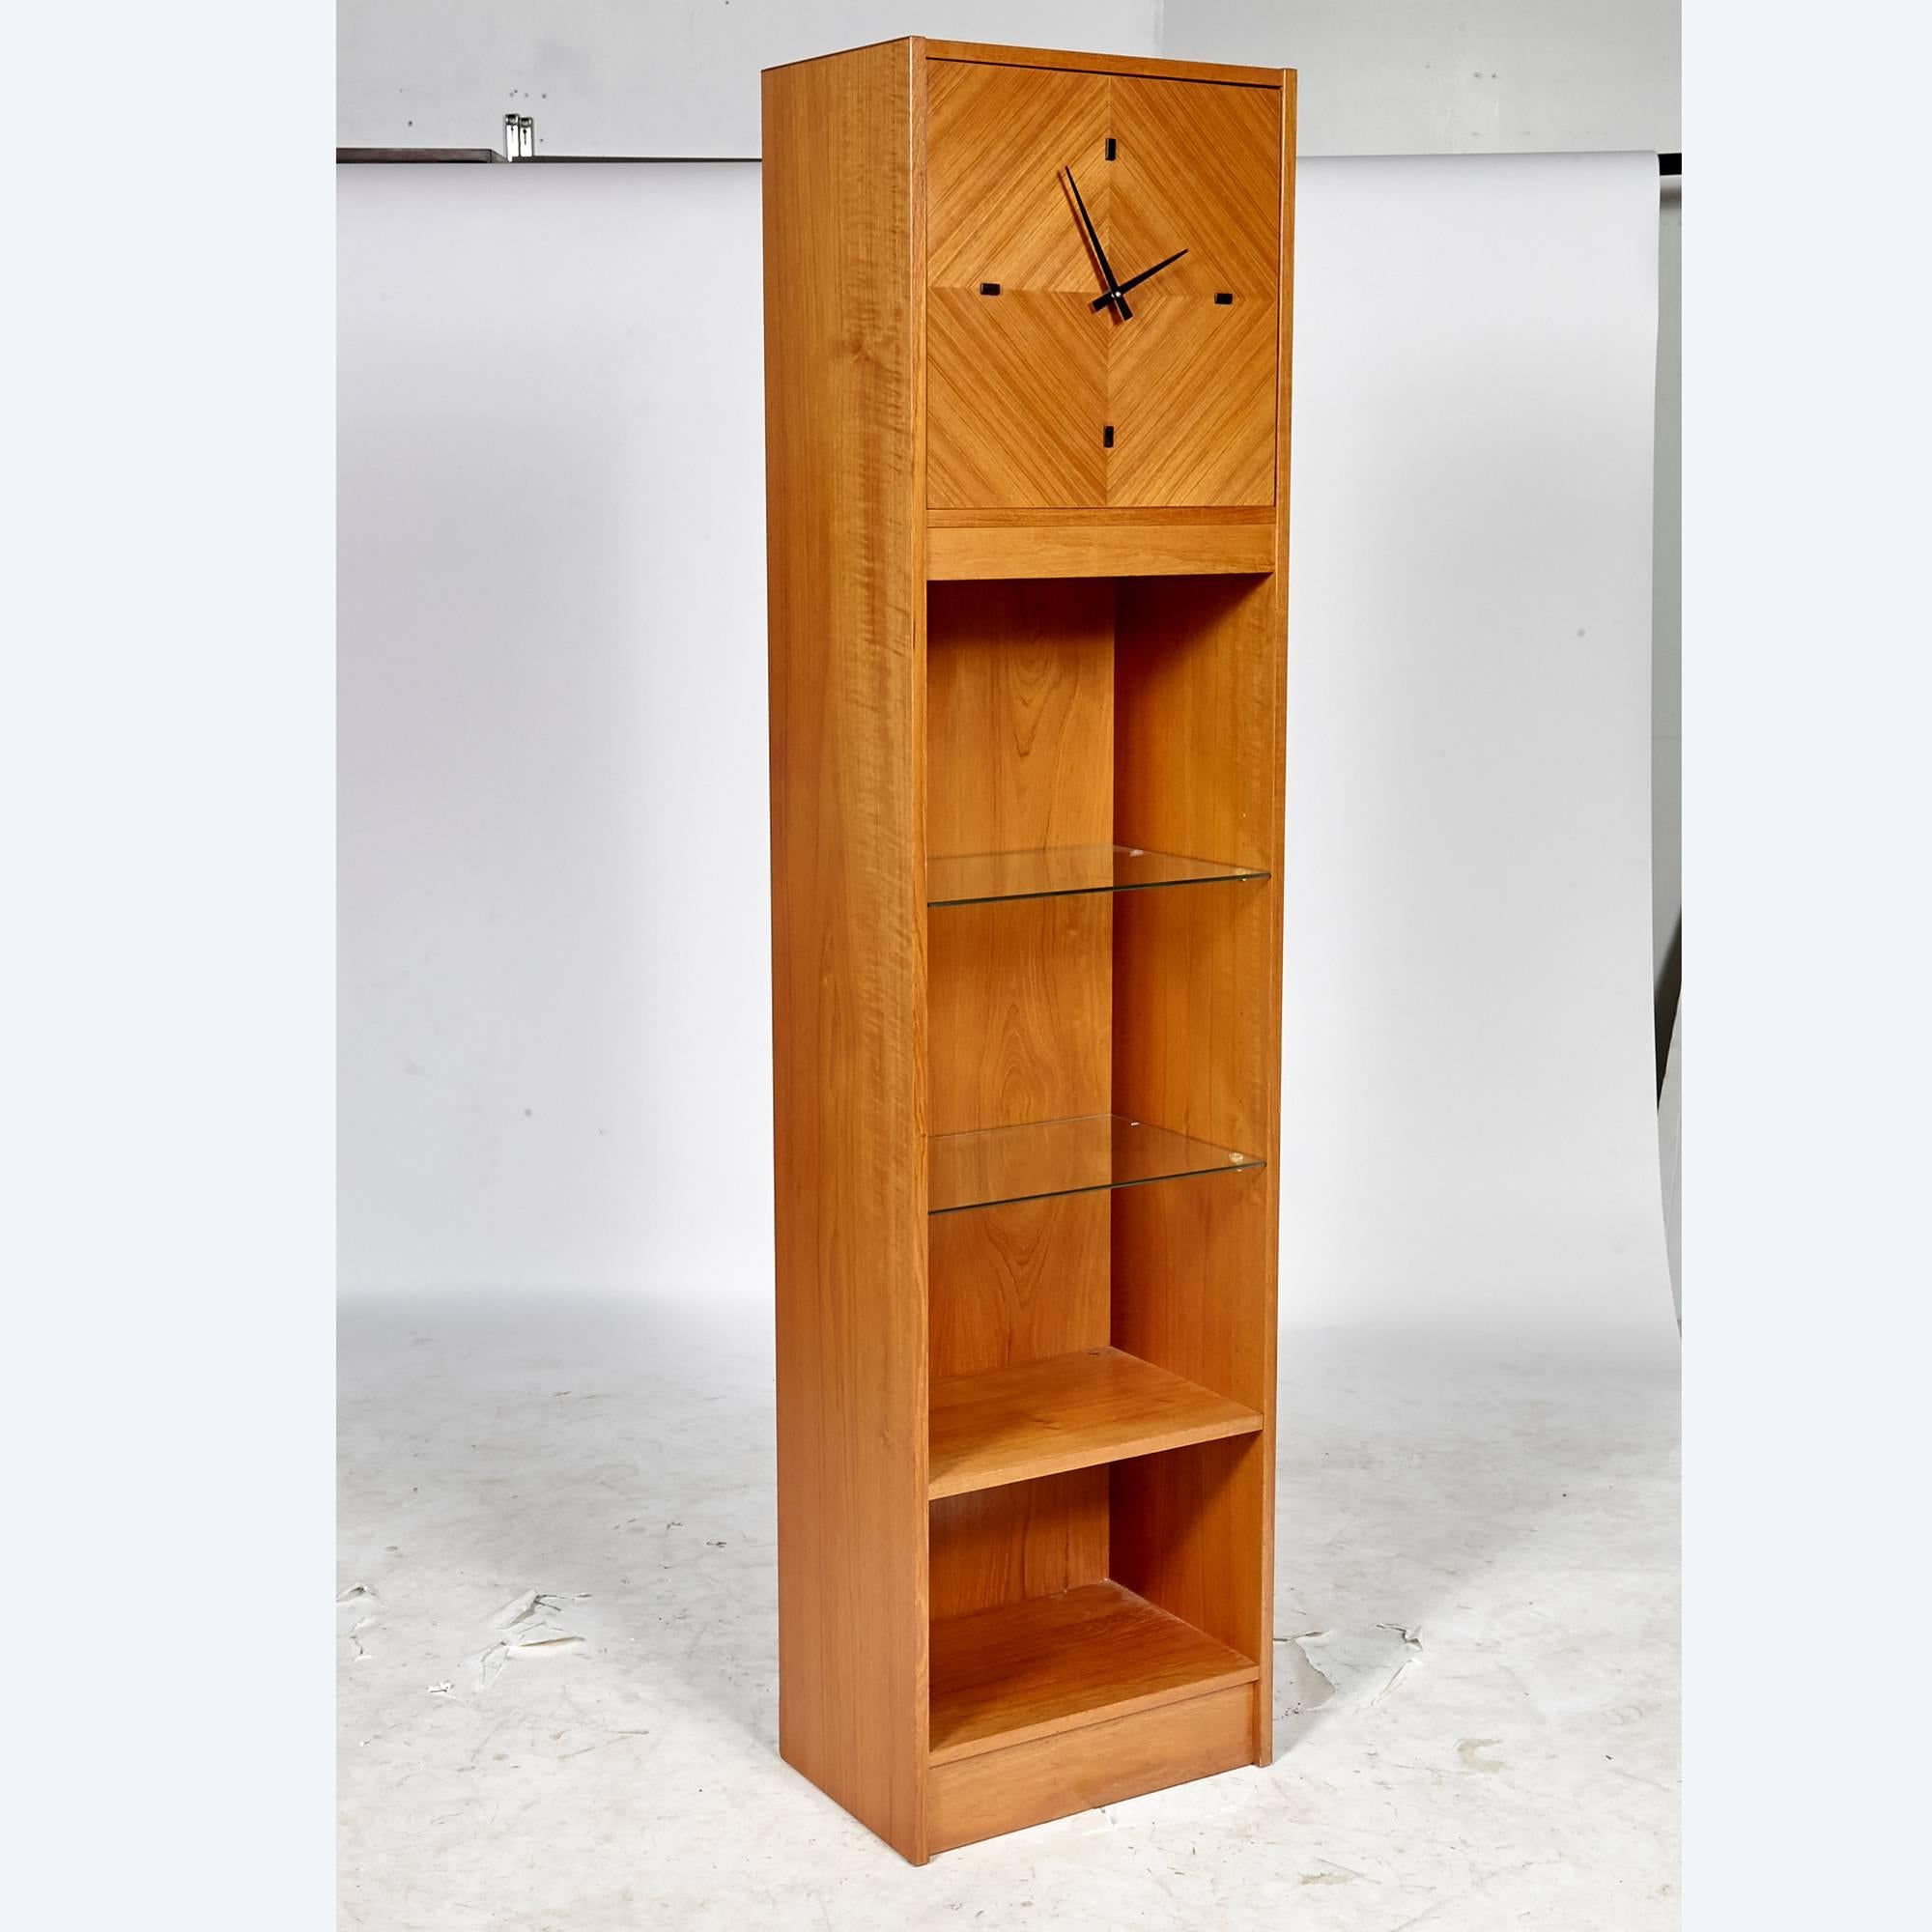 Vintage Scandinavian Modern tall Danish teak grandfather clock with built-in curio shelves. The clock is battery operated and in working condition. The shelves are a mix of glass and wood and face is a diamond inlaid style pattern.